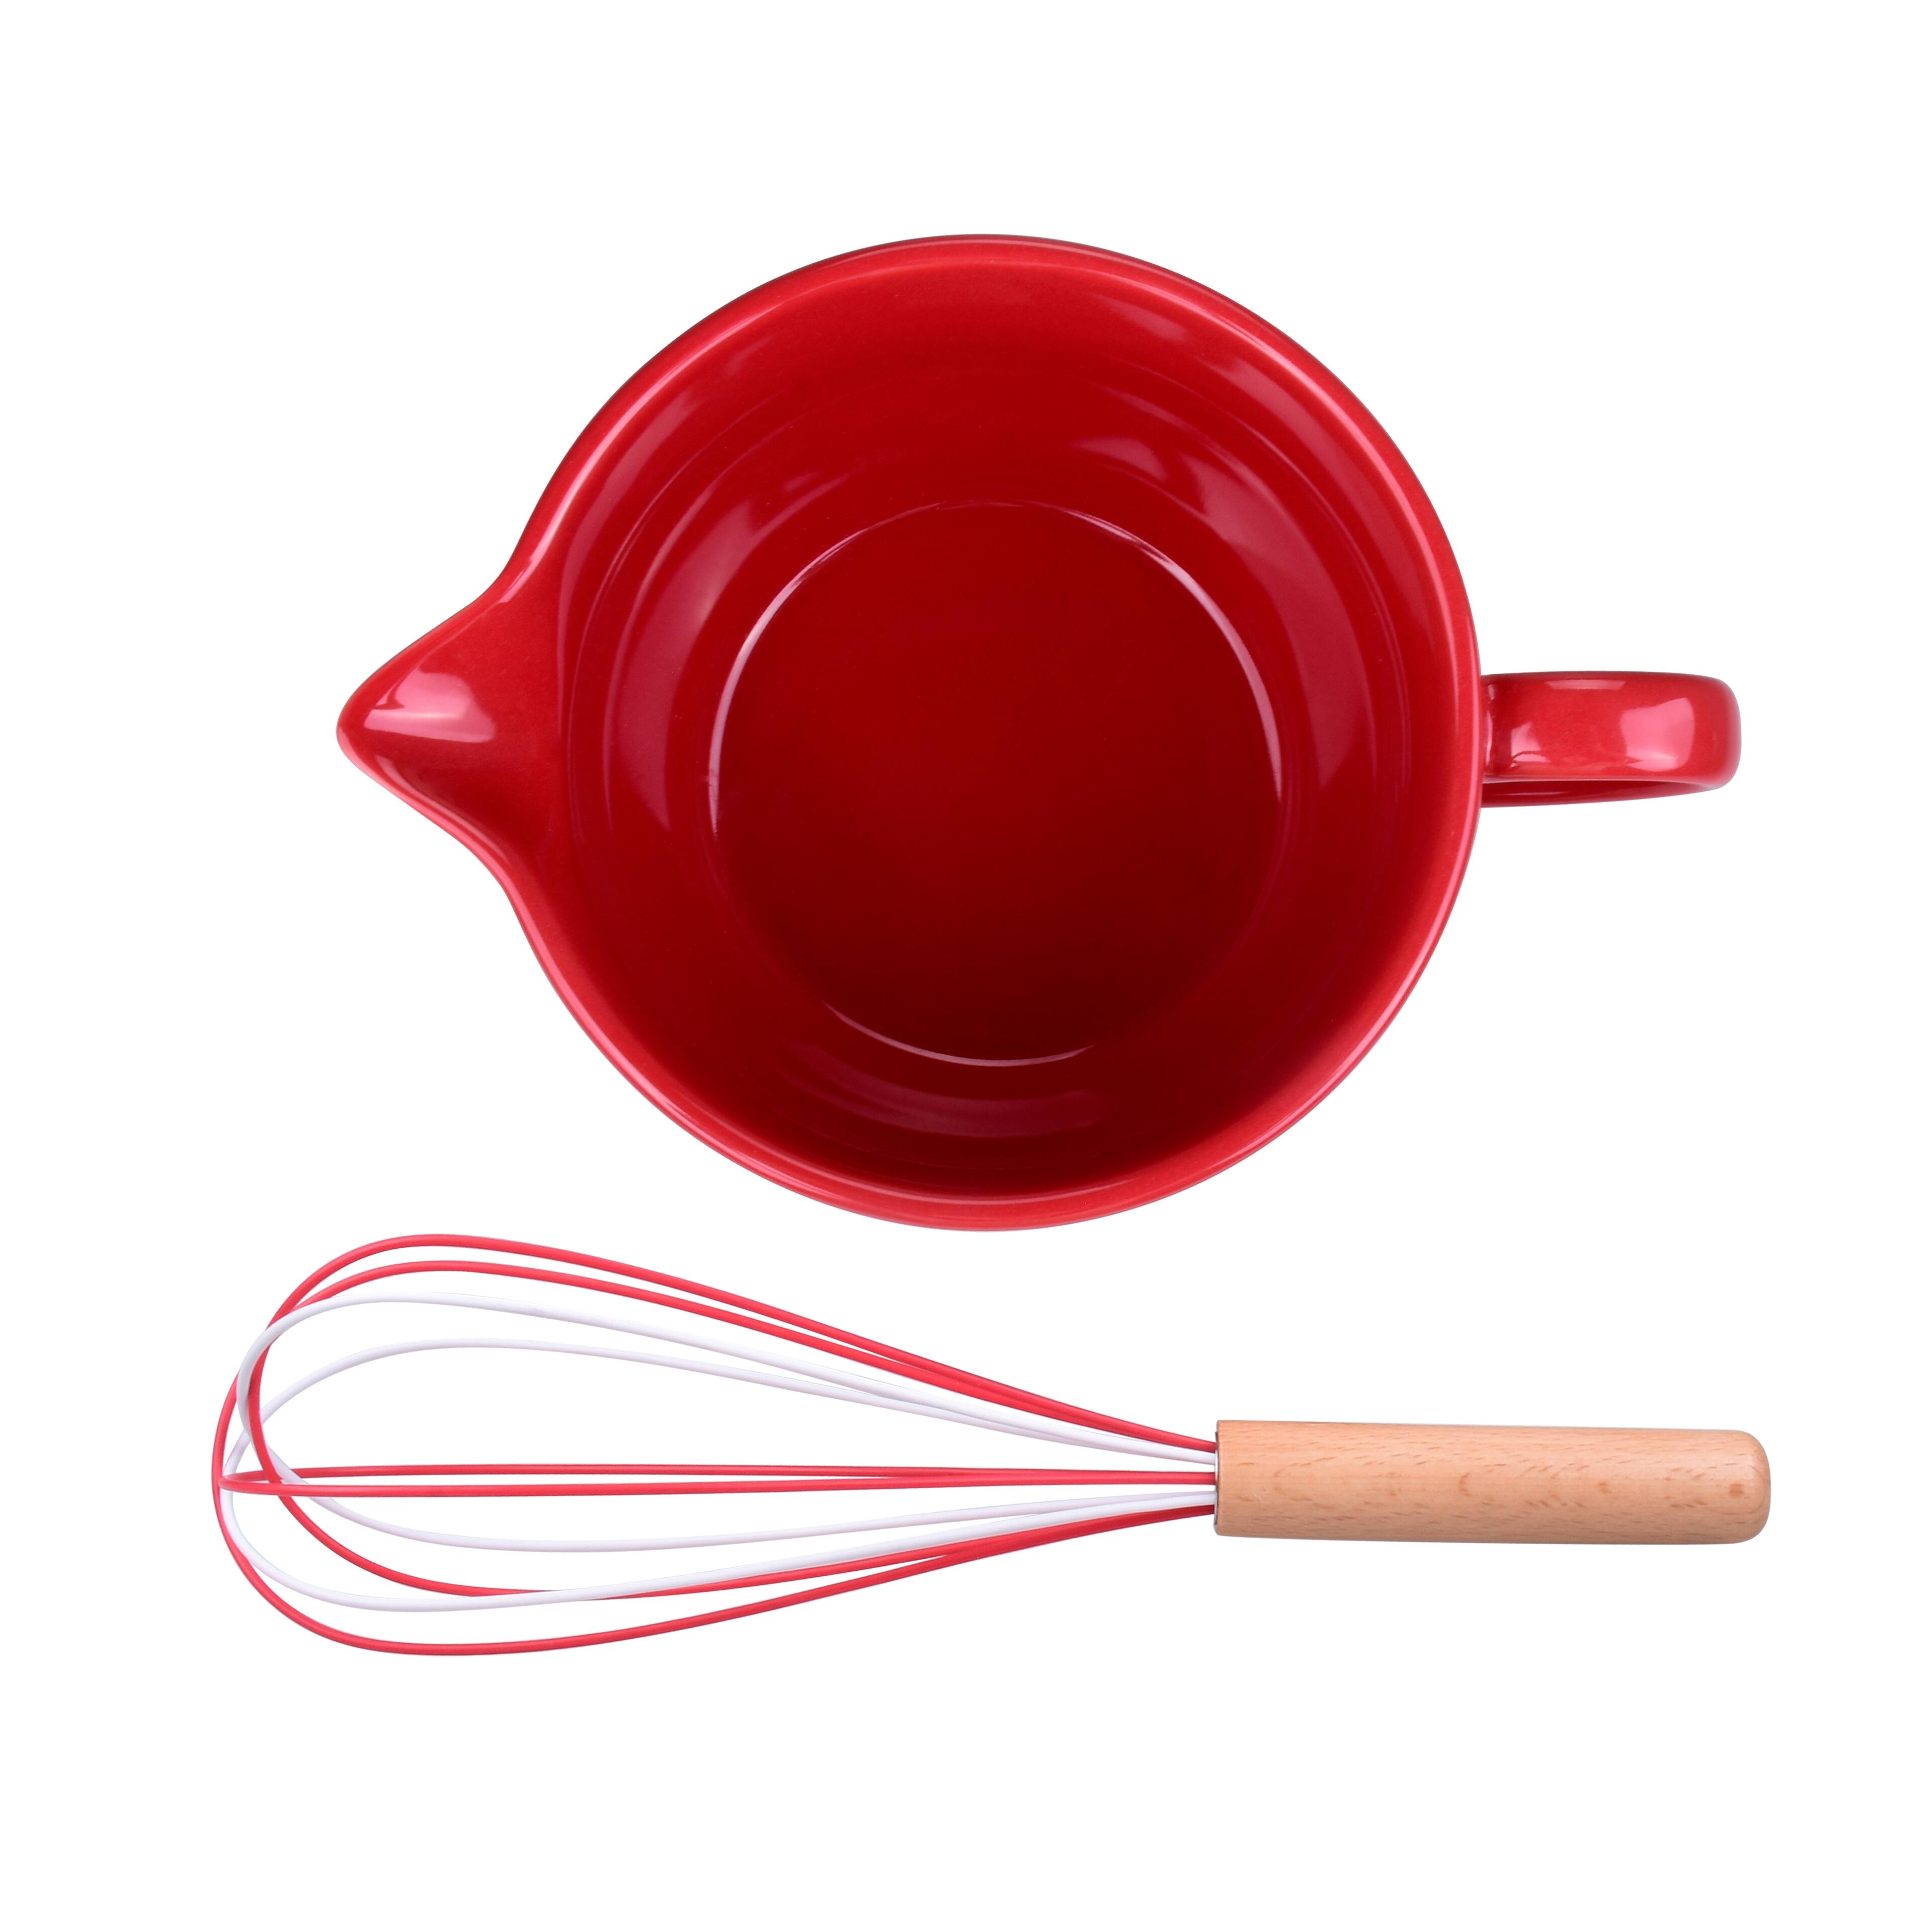 Red Merry Christmas Bowl & Whisk Baking Set by Celebrate It™